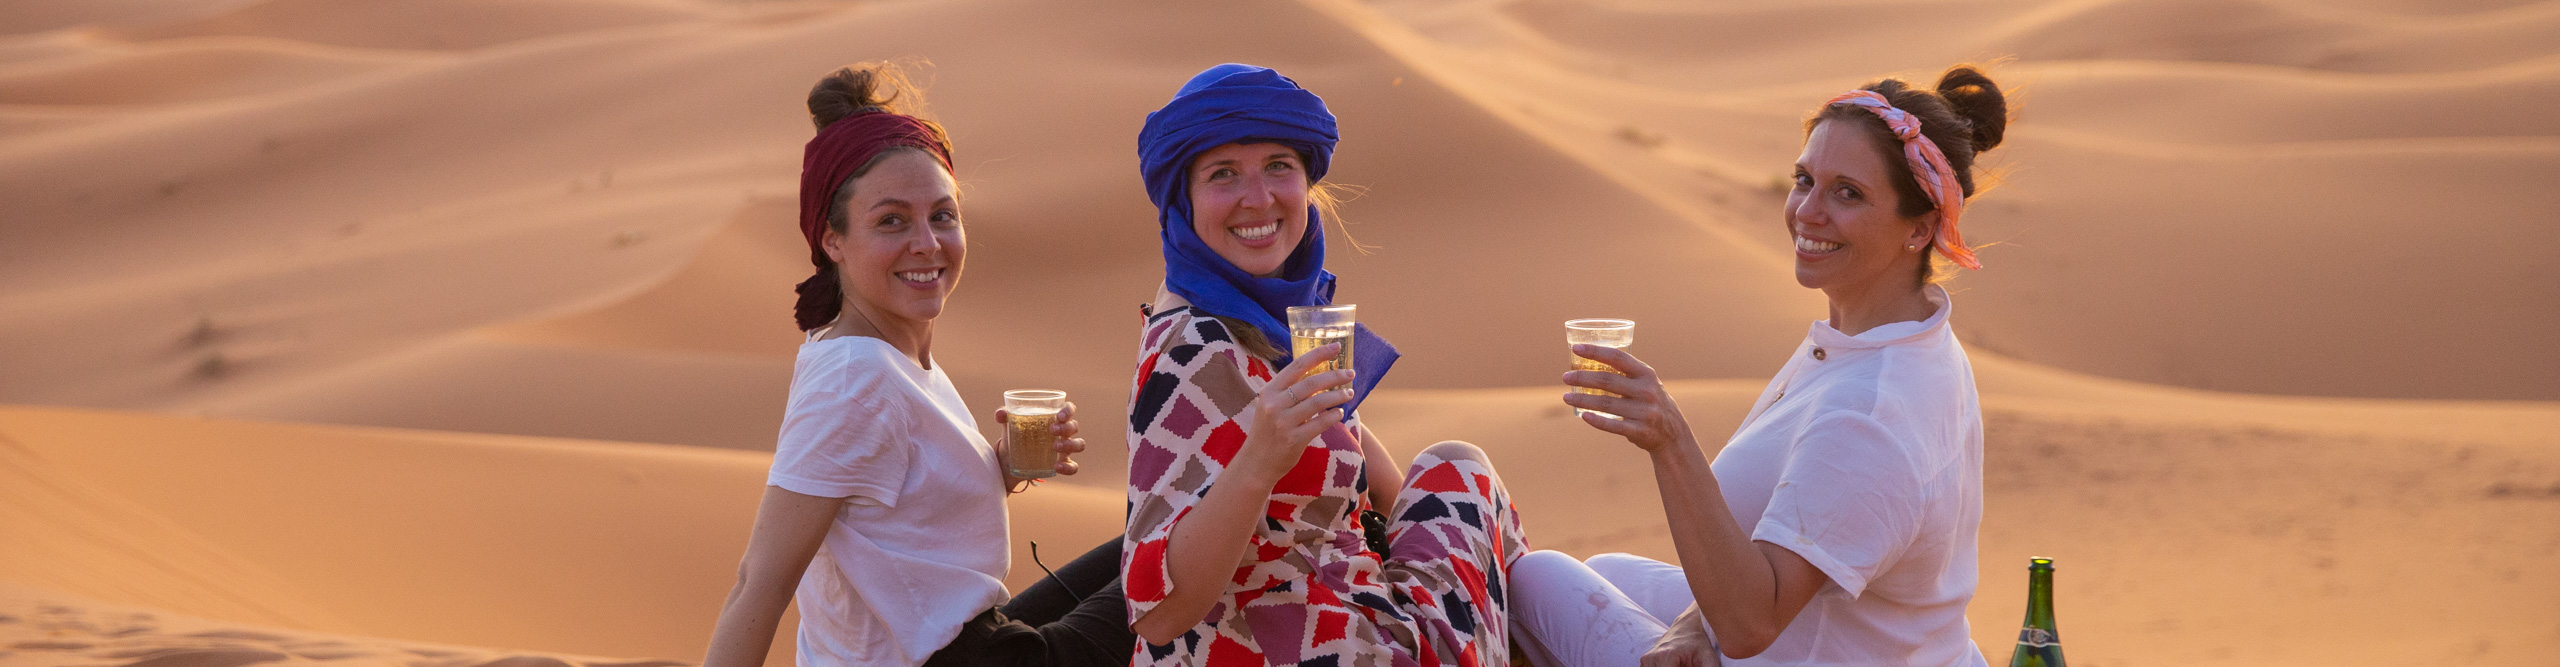 Women drinking wine at sunset in the desert in Morocco